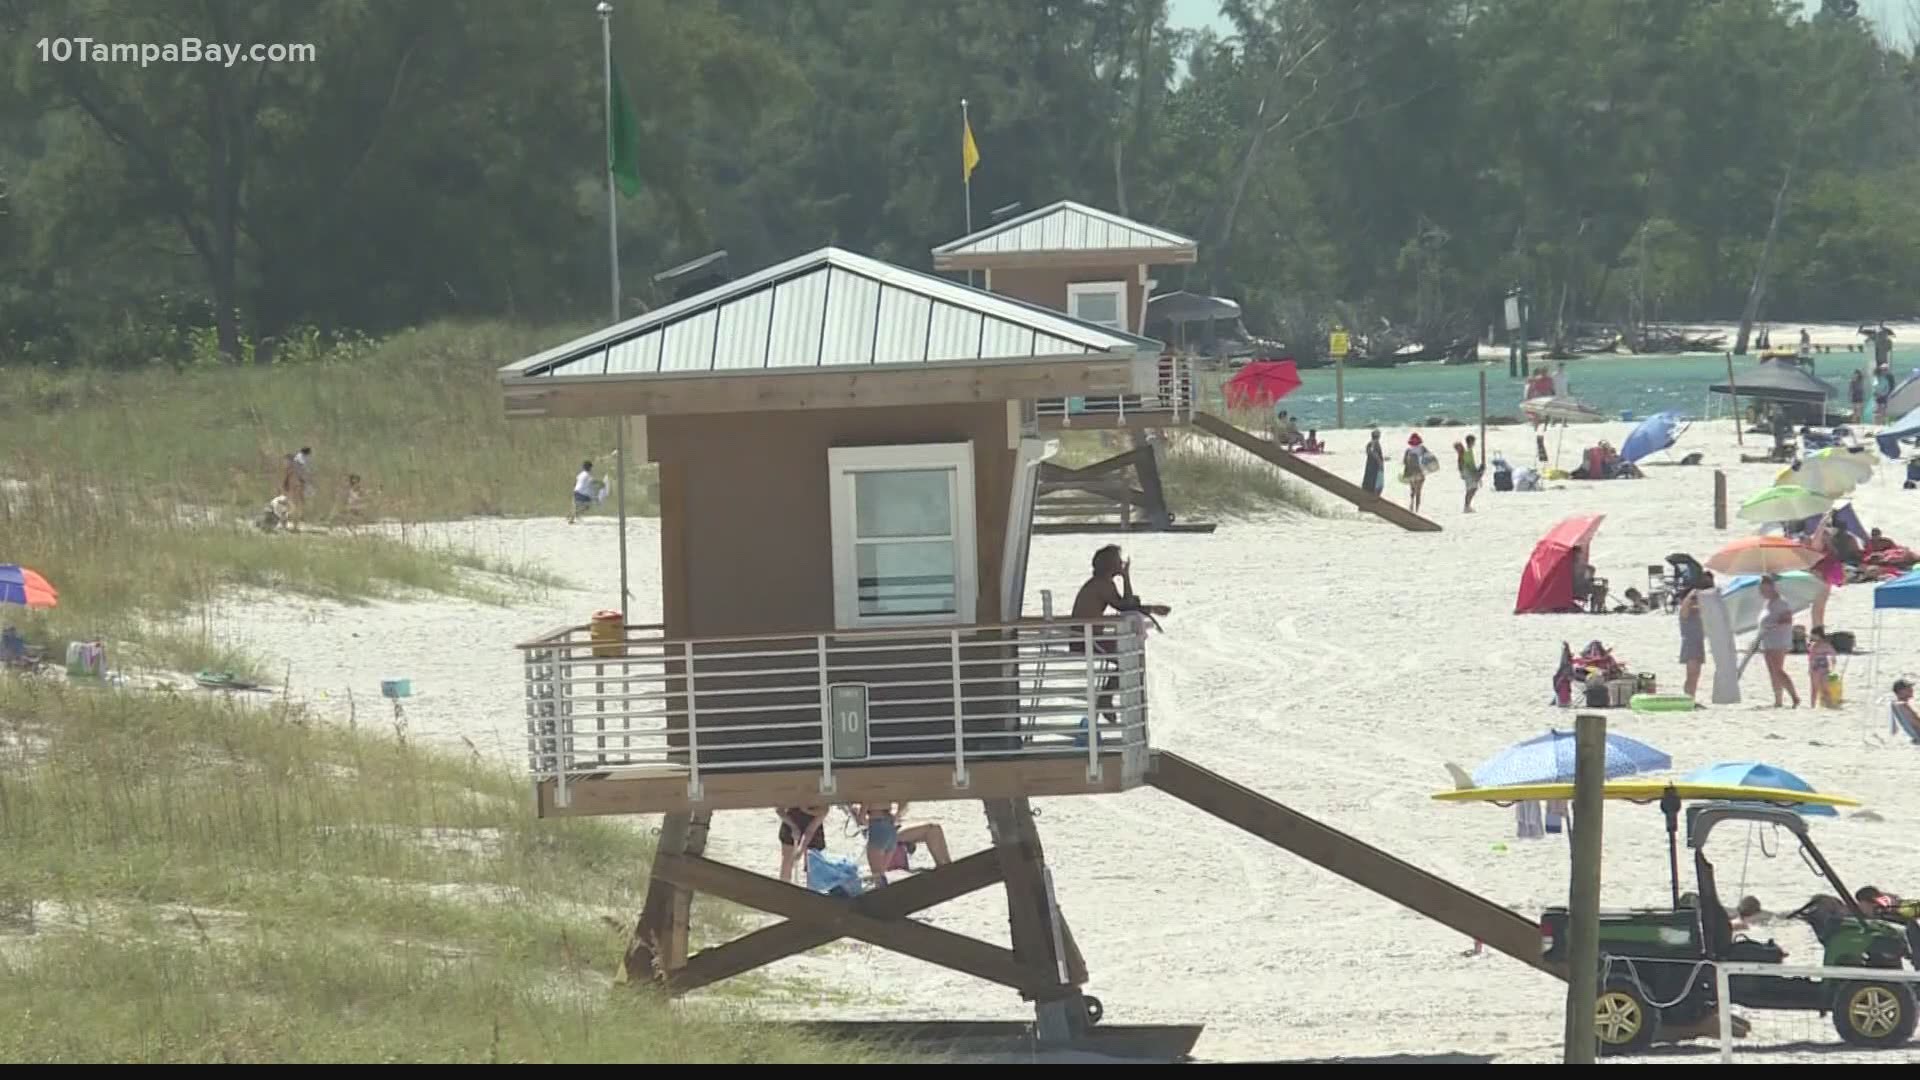 A new system built into lifeguard stands is designed to stop a lightening strike from forming in order to protect first responders and beachgoers during a storm.